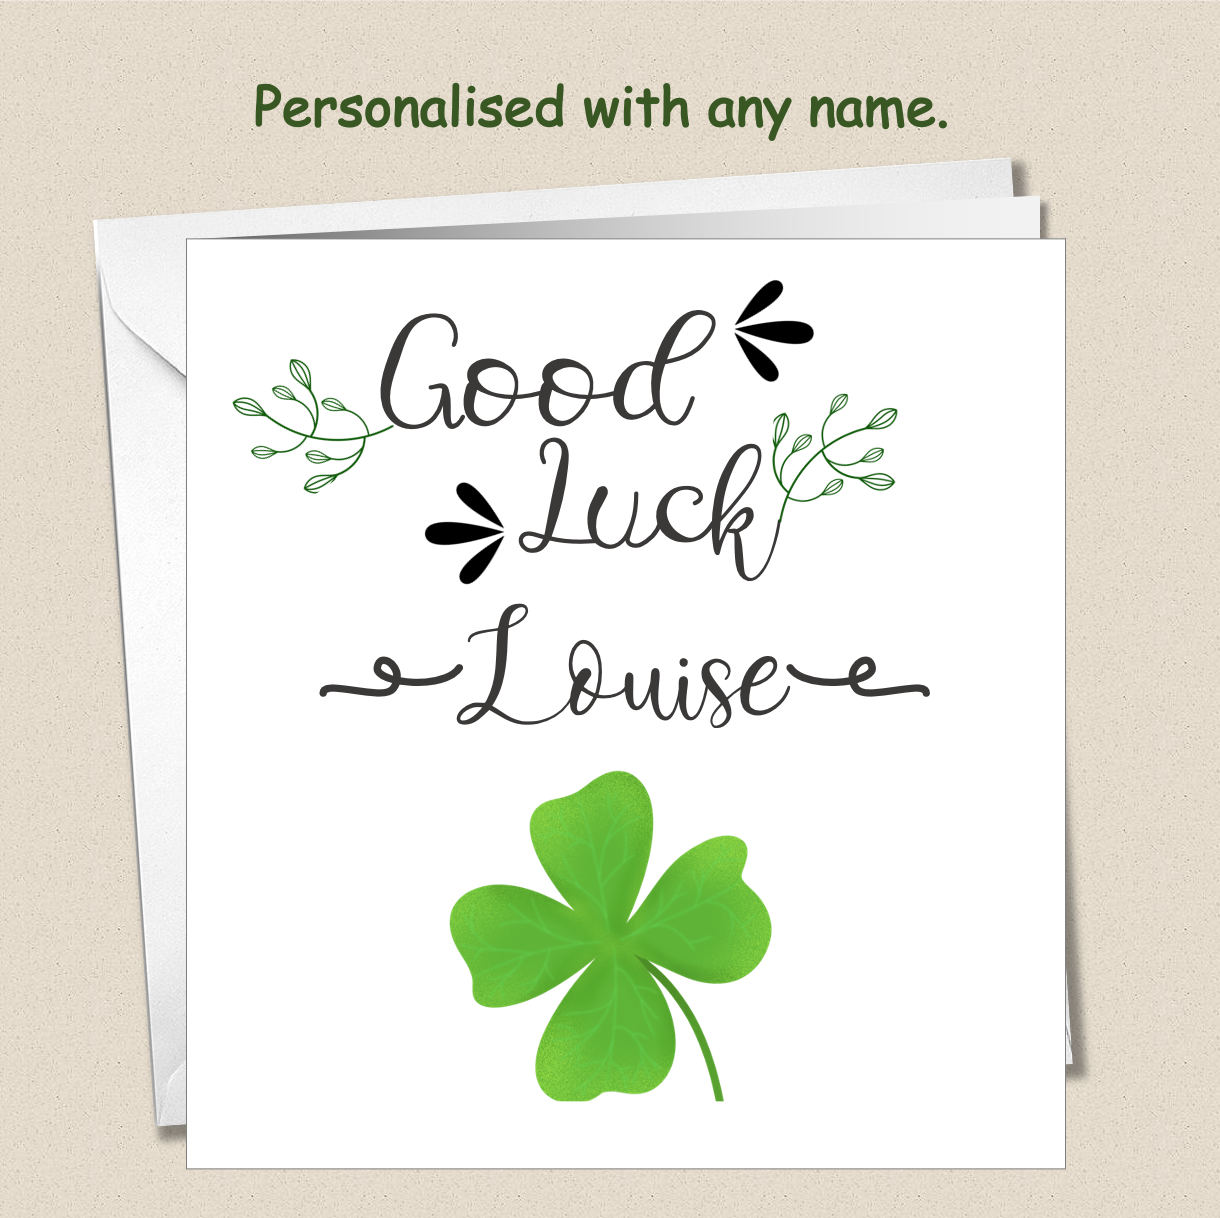 Personalised Good Luck card - four 4 leaf clover scroll